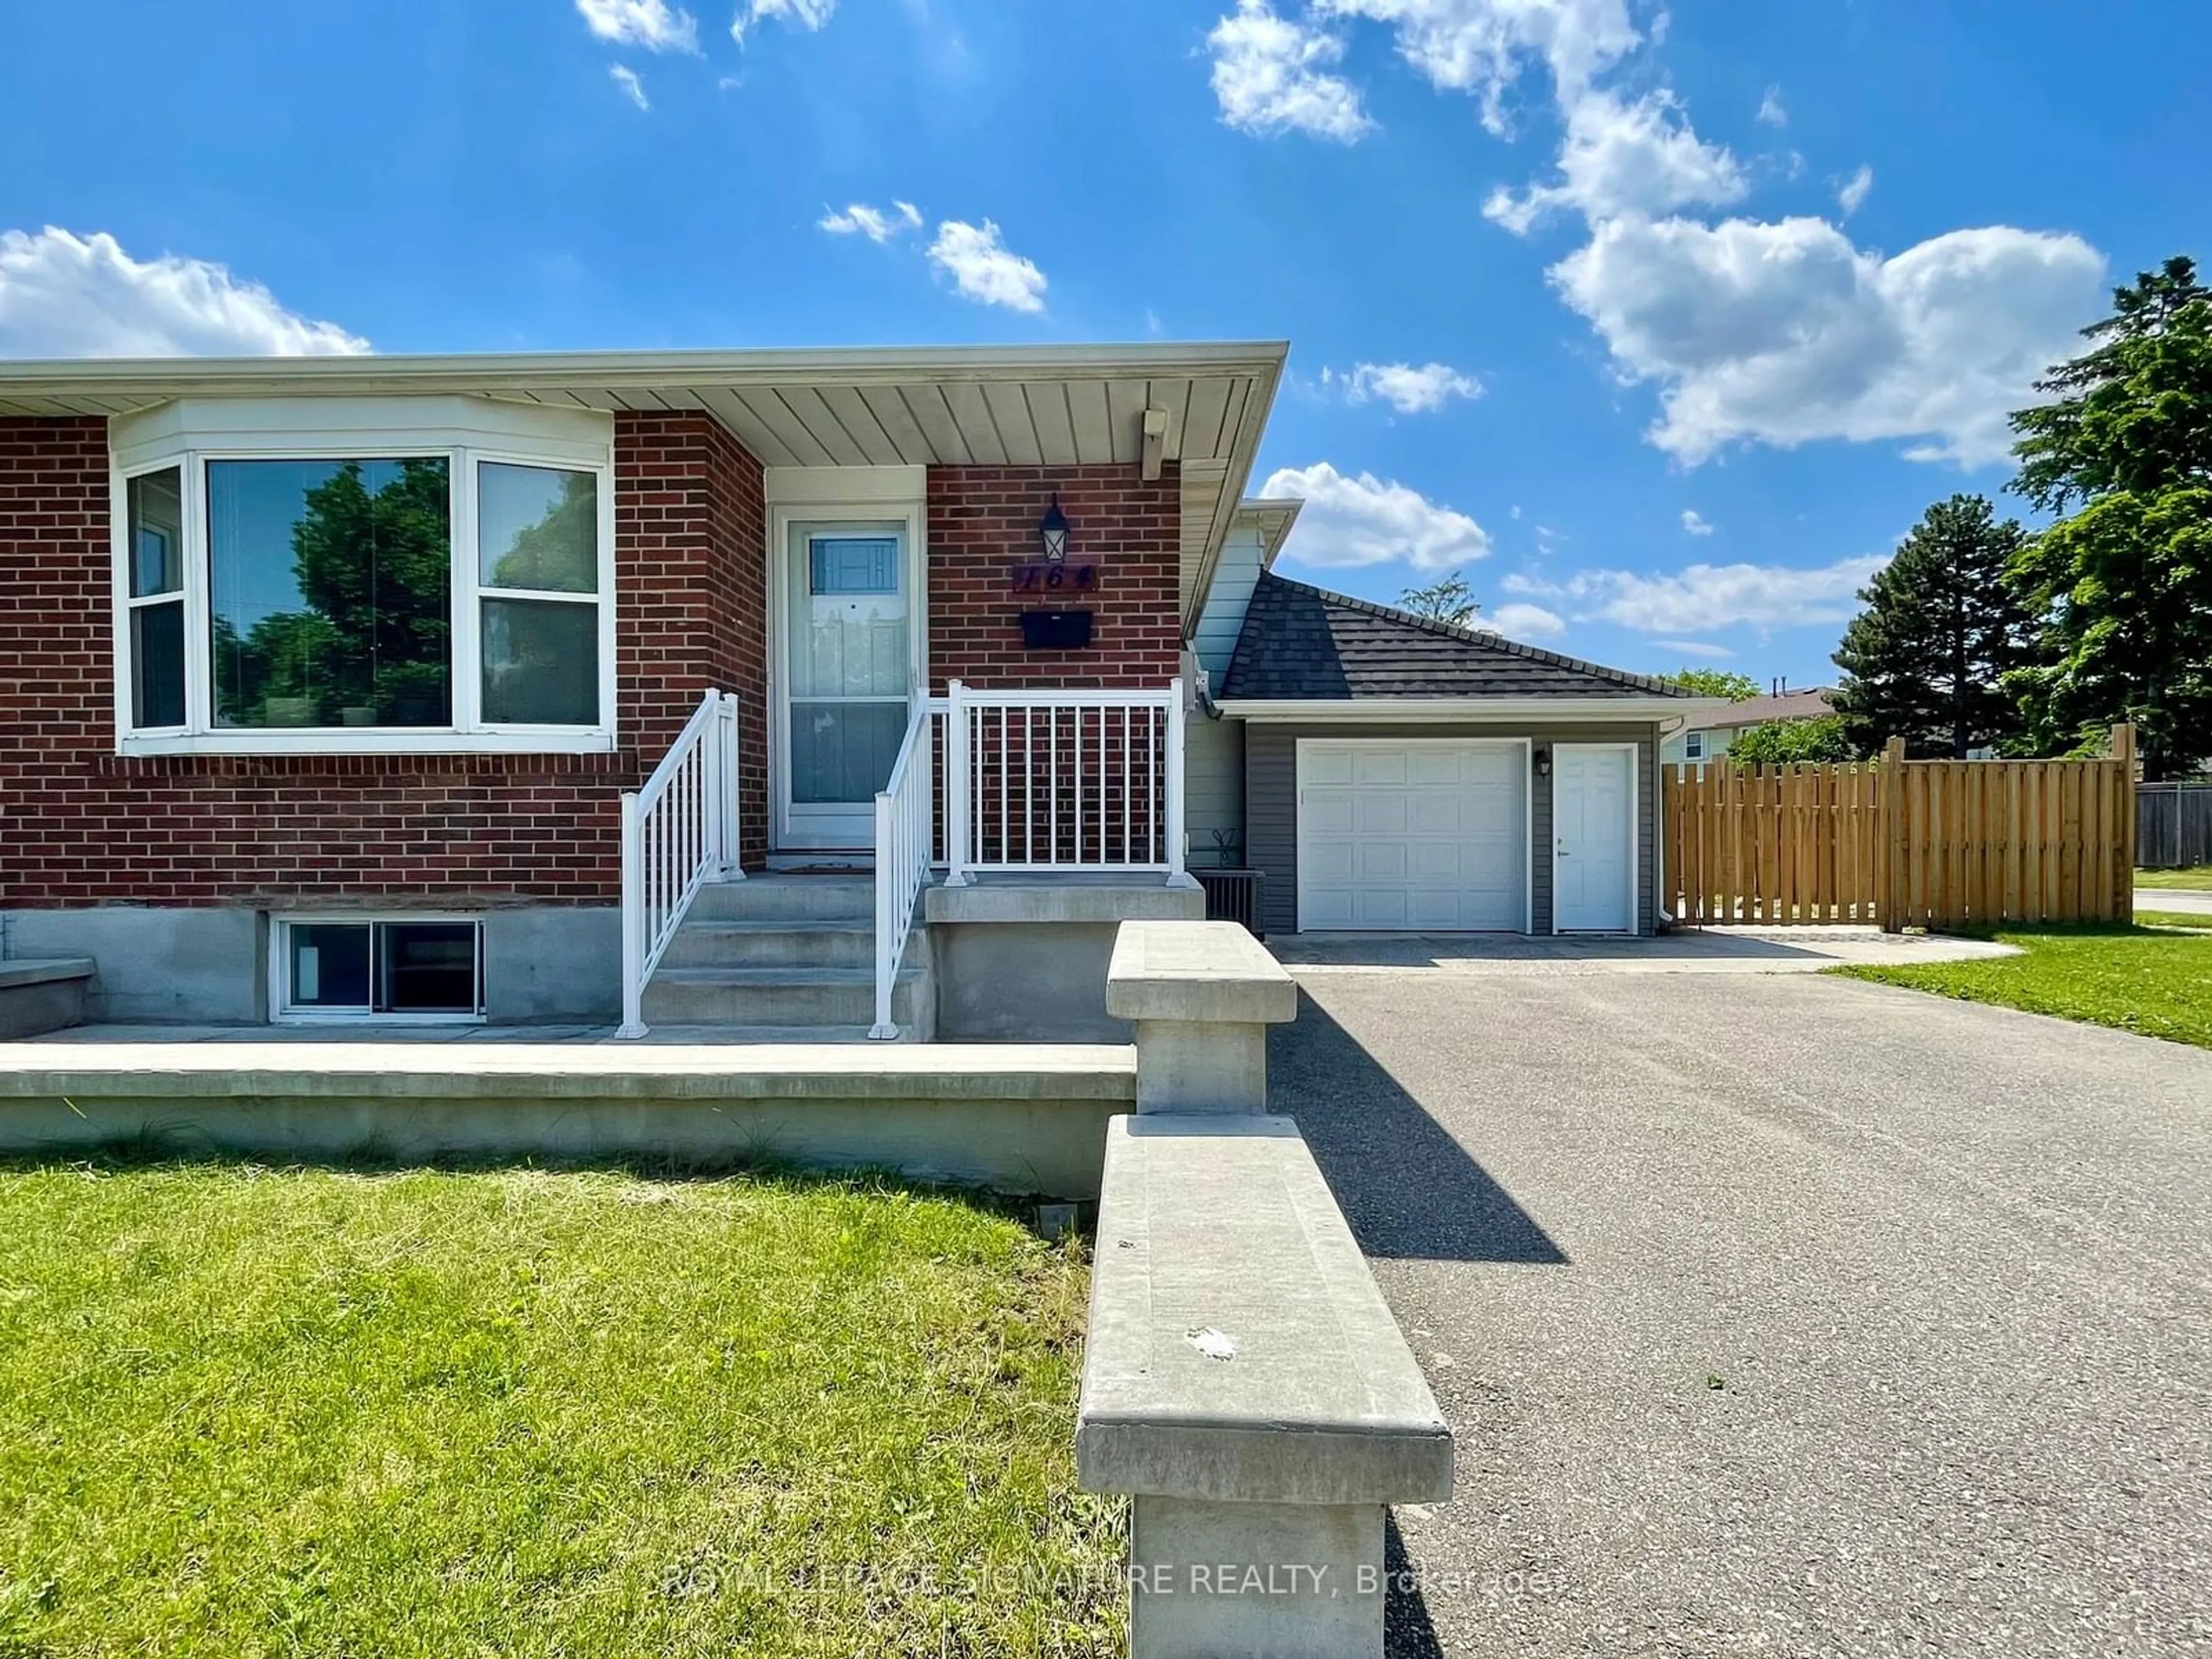 Home with brick exterior material for 164 Archdekin Dr, Brampton Ontario L6V 1Y7